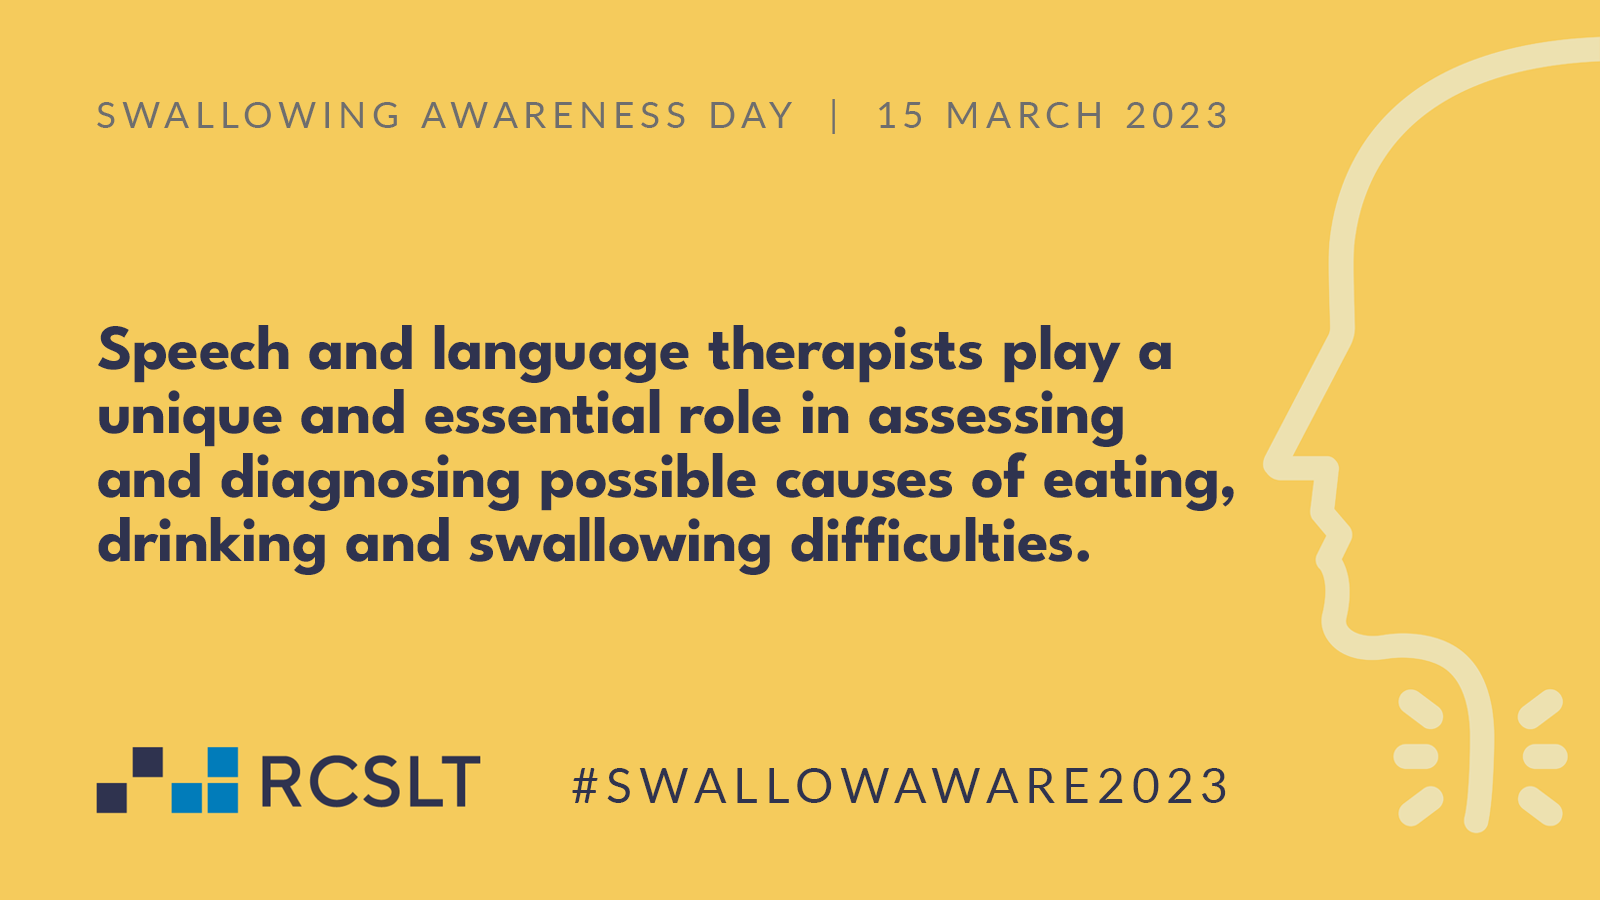 Swallowing Awareness Day 2023 Twitter Post graphic